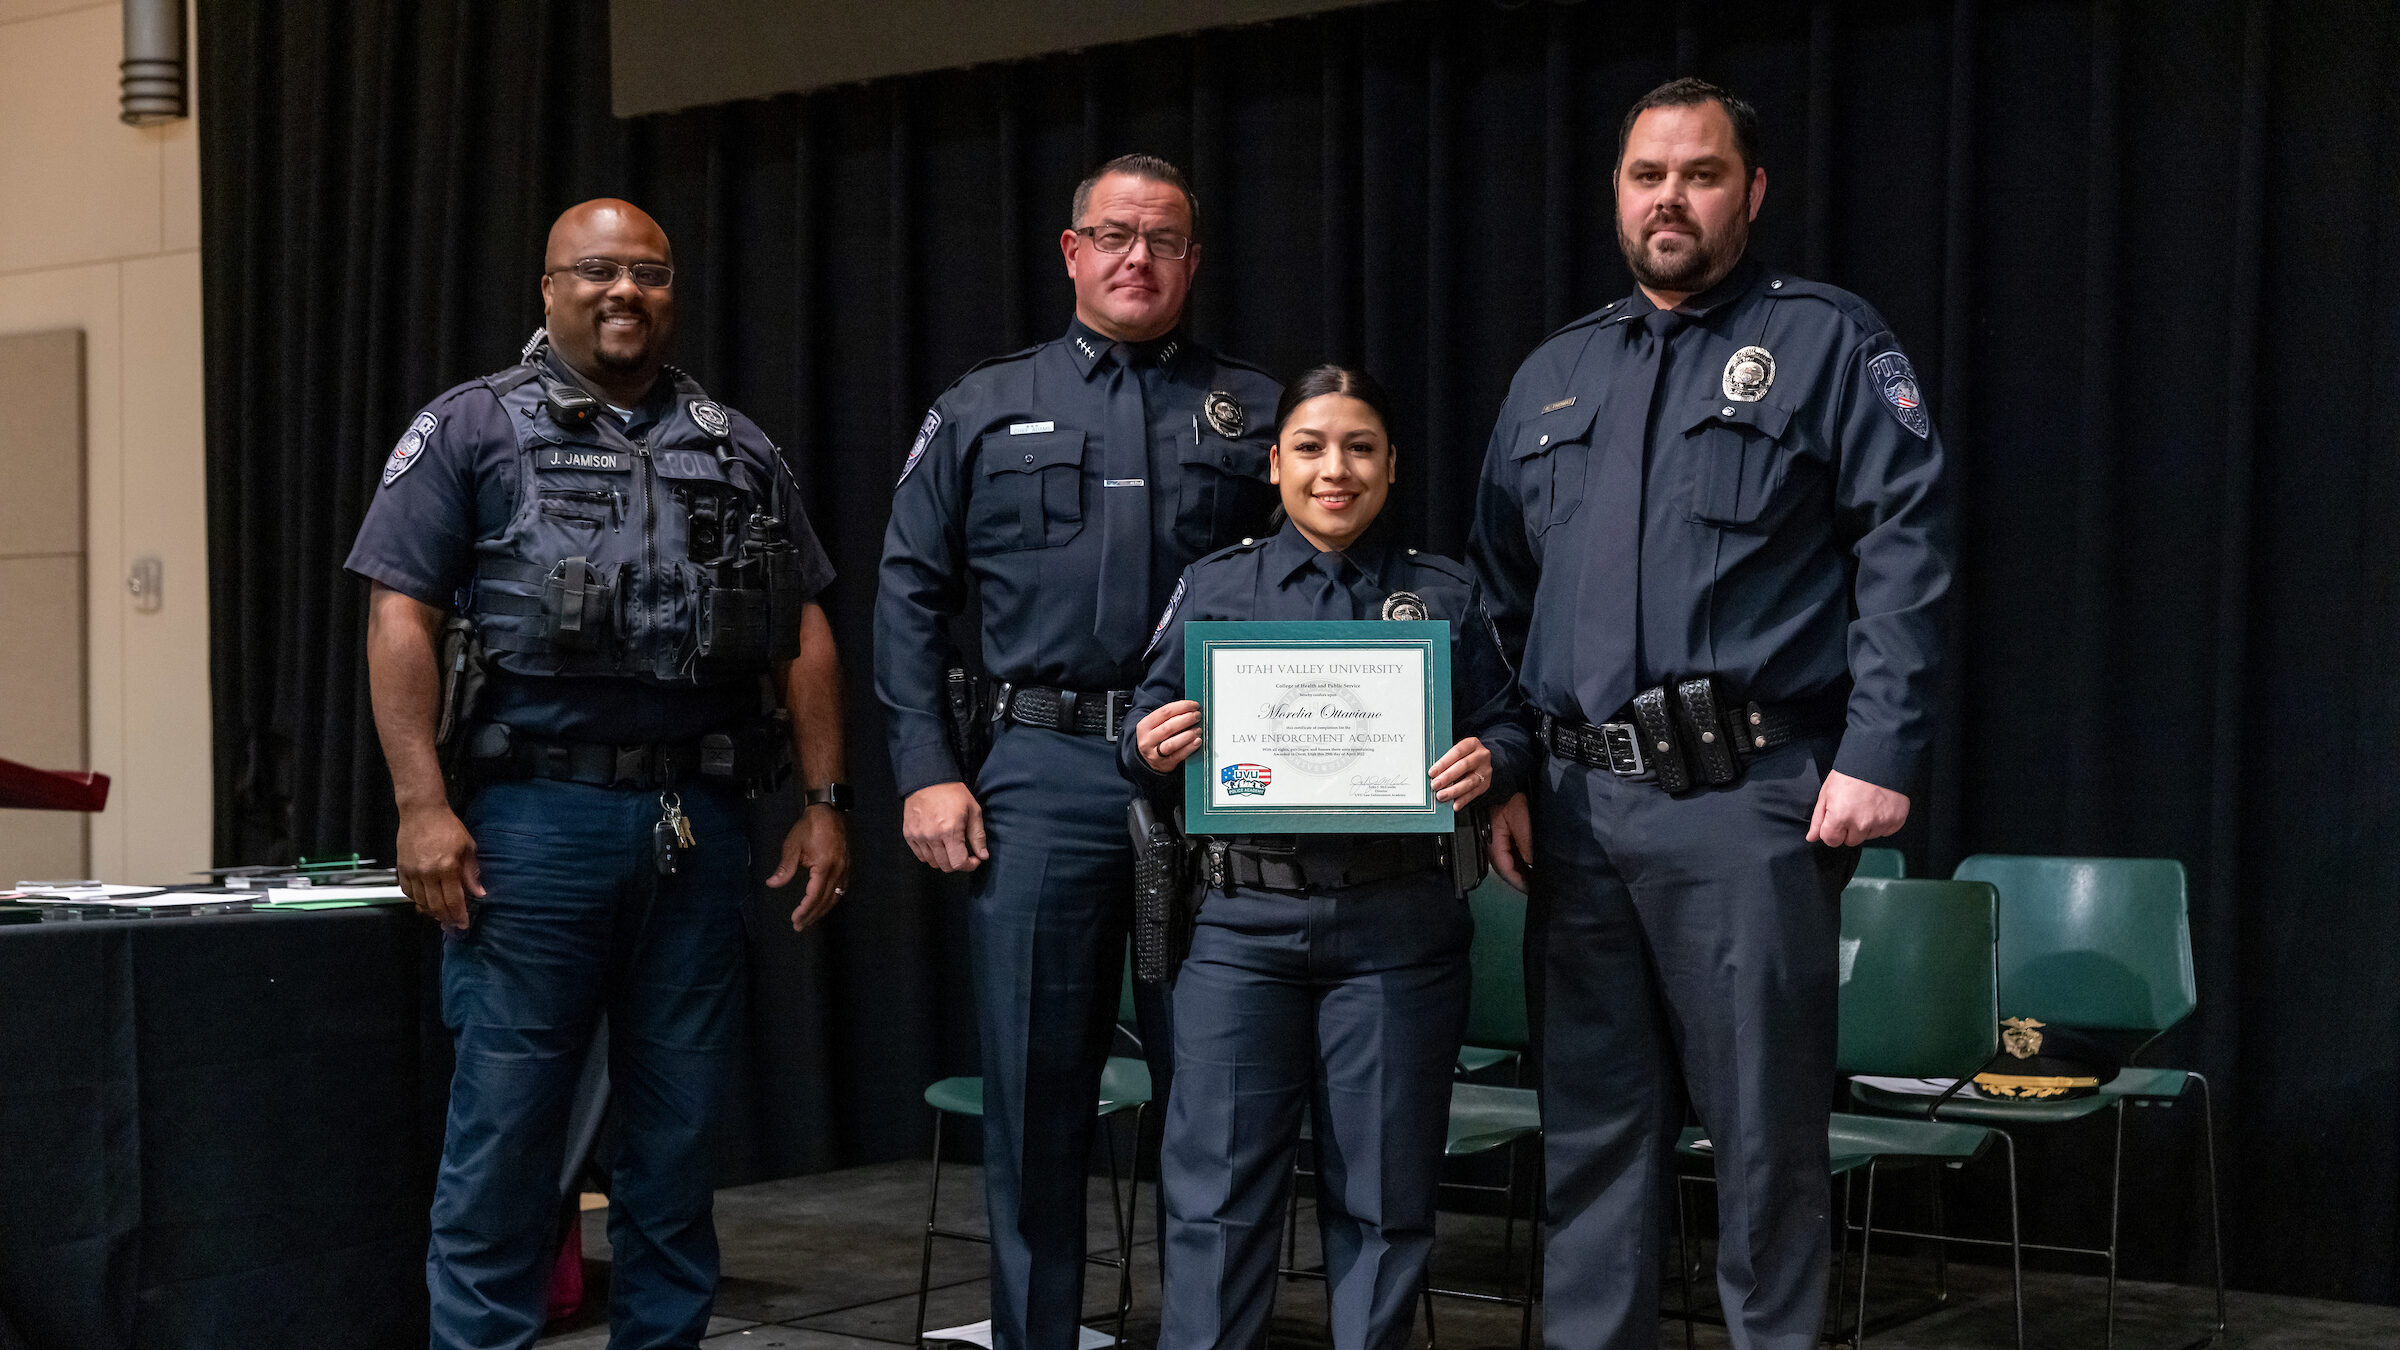 Utah Valley University started their Police Academy back in 1996 and this year, the school had more...